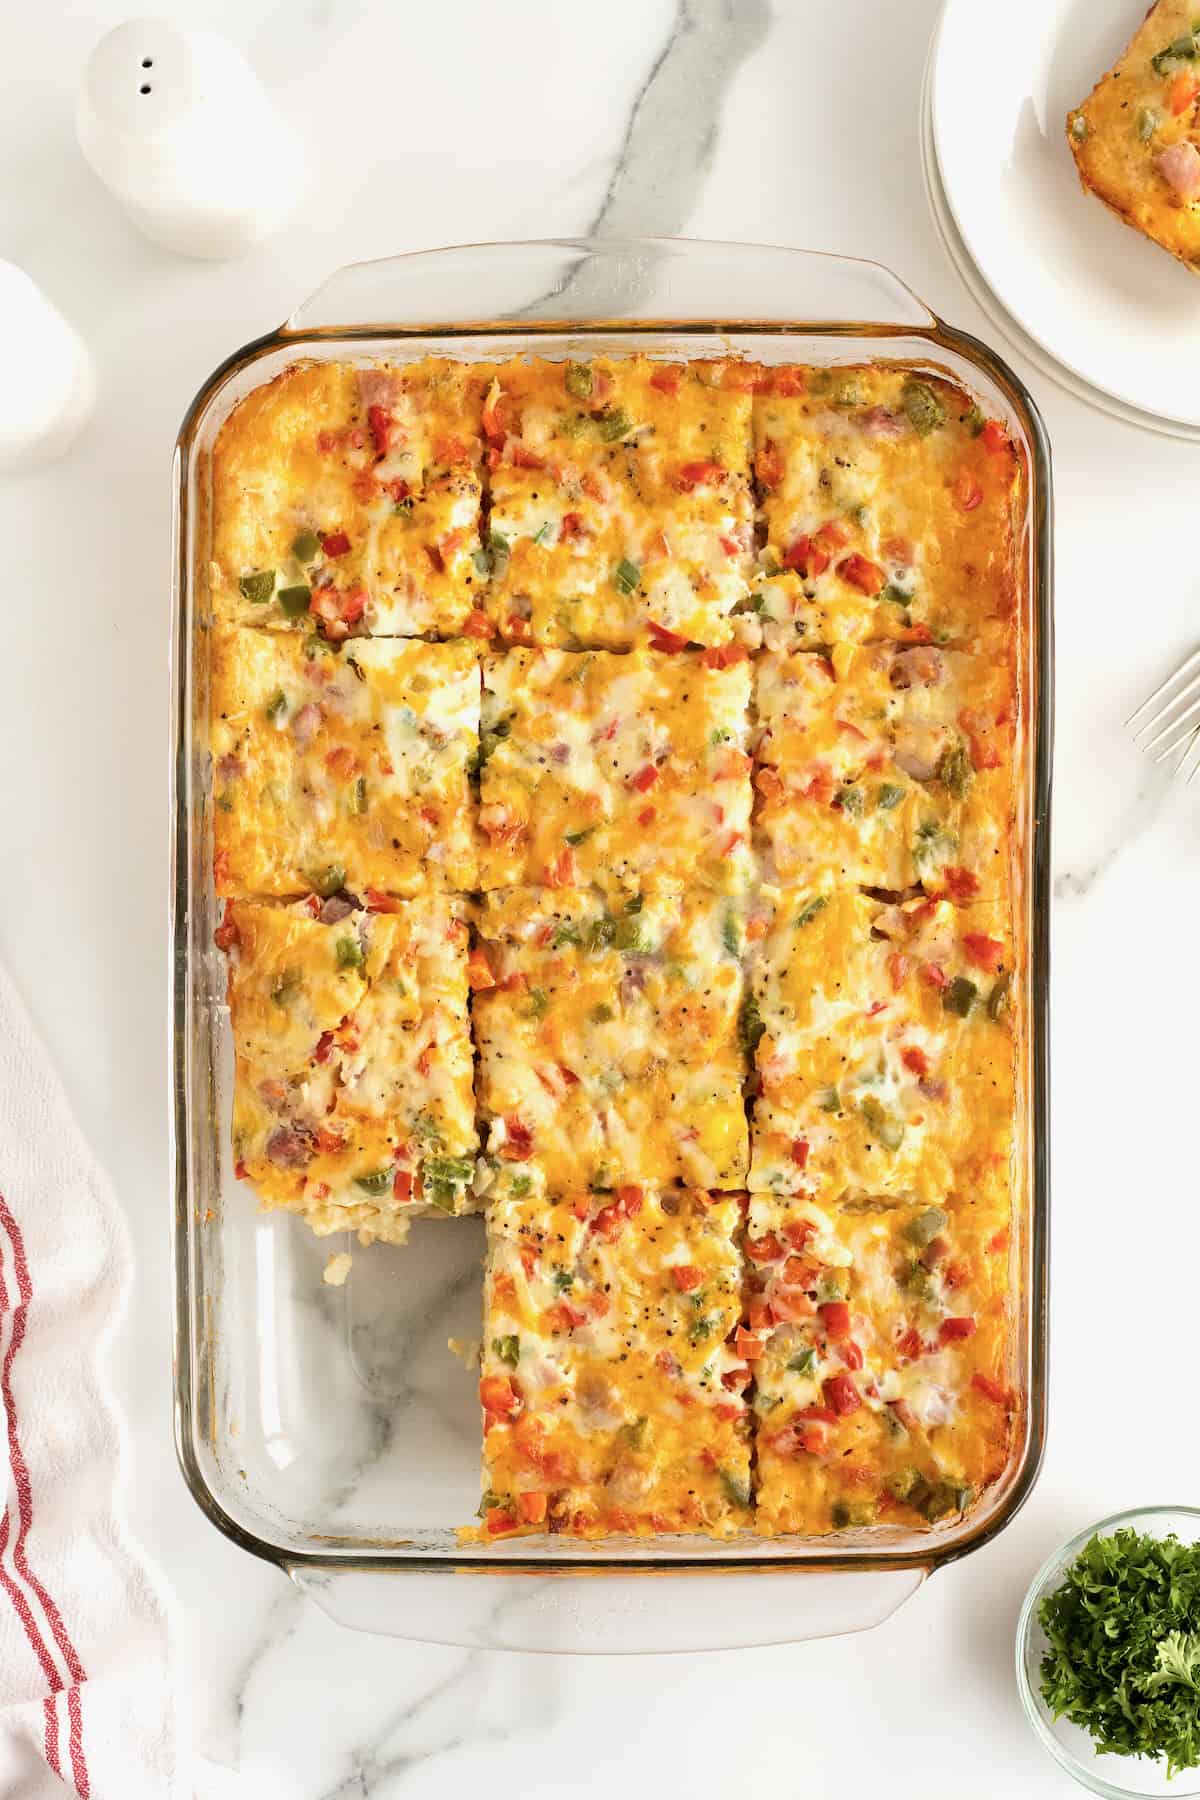 Cooked breakfast casserole in a glass casserole dish with a slice cut out of it.